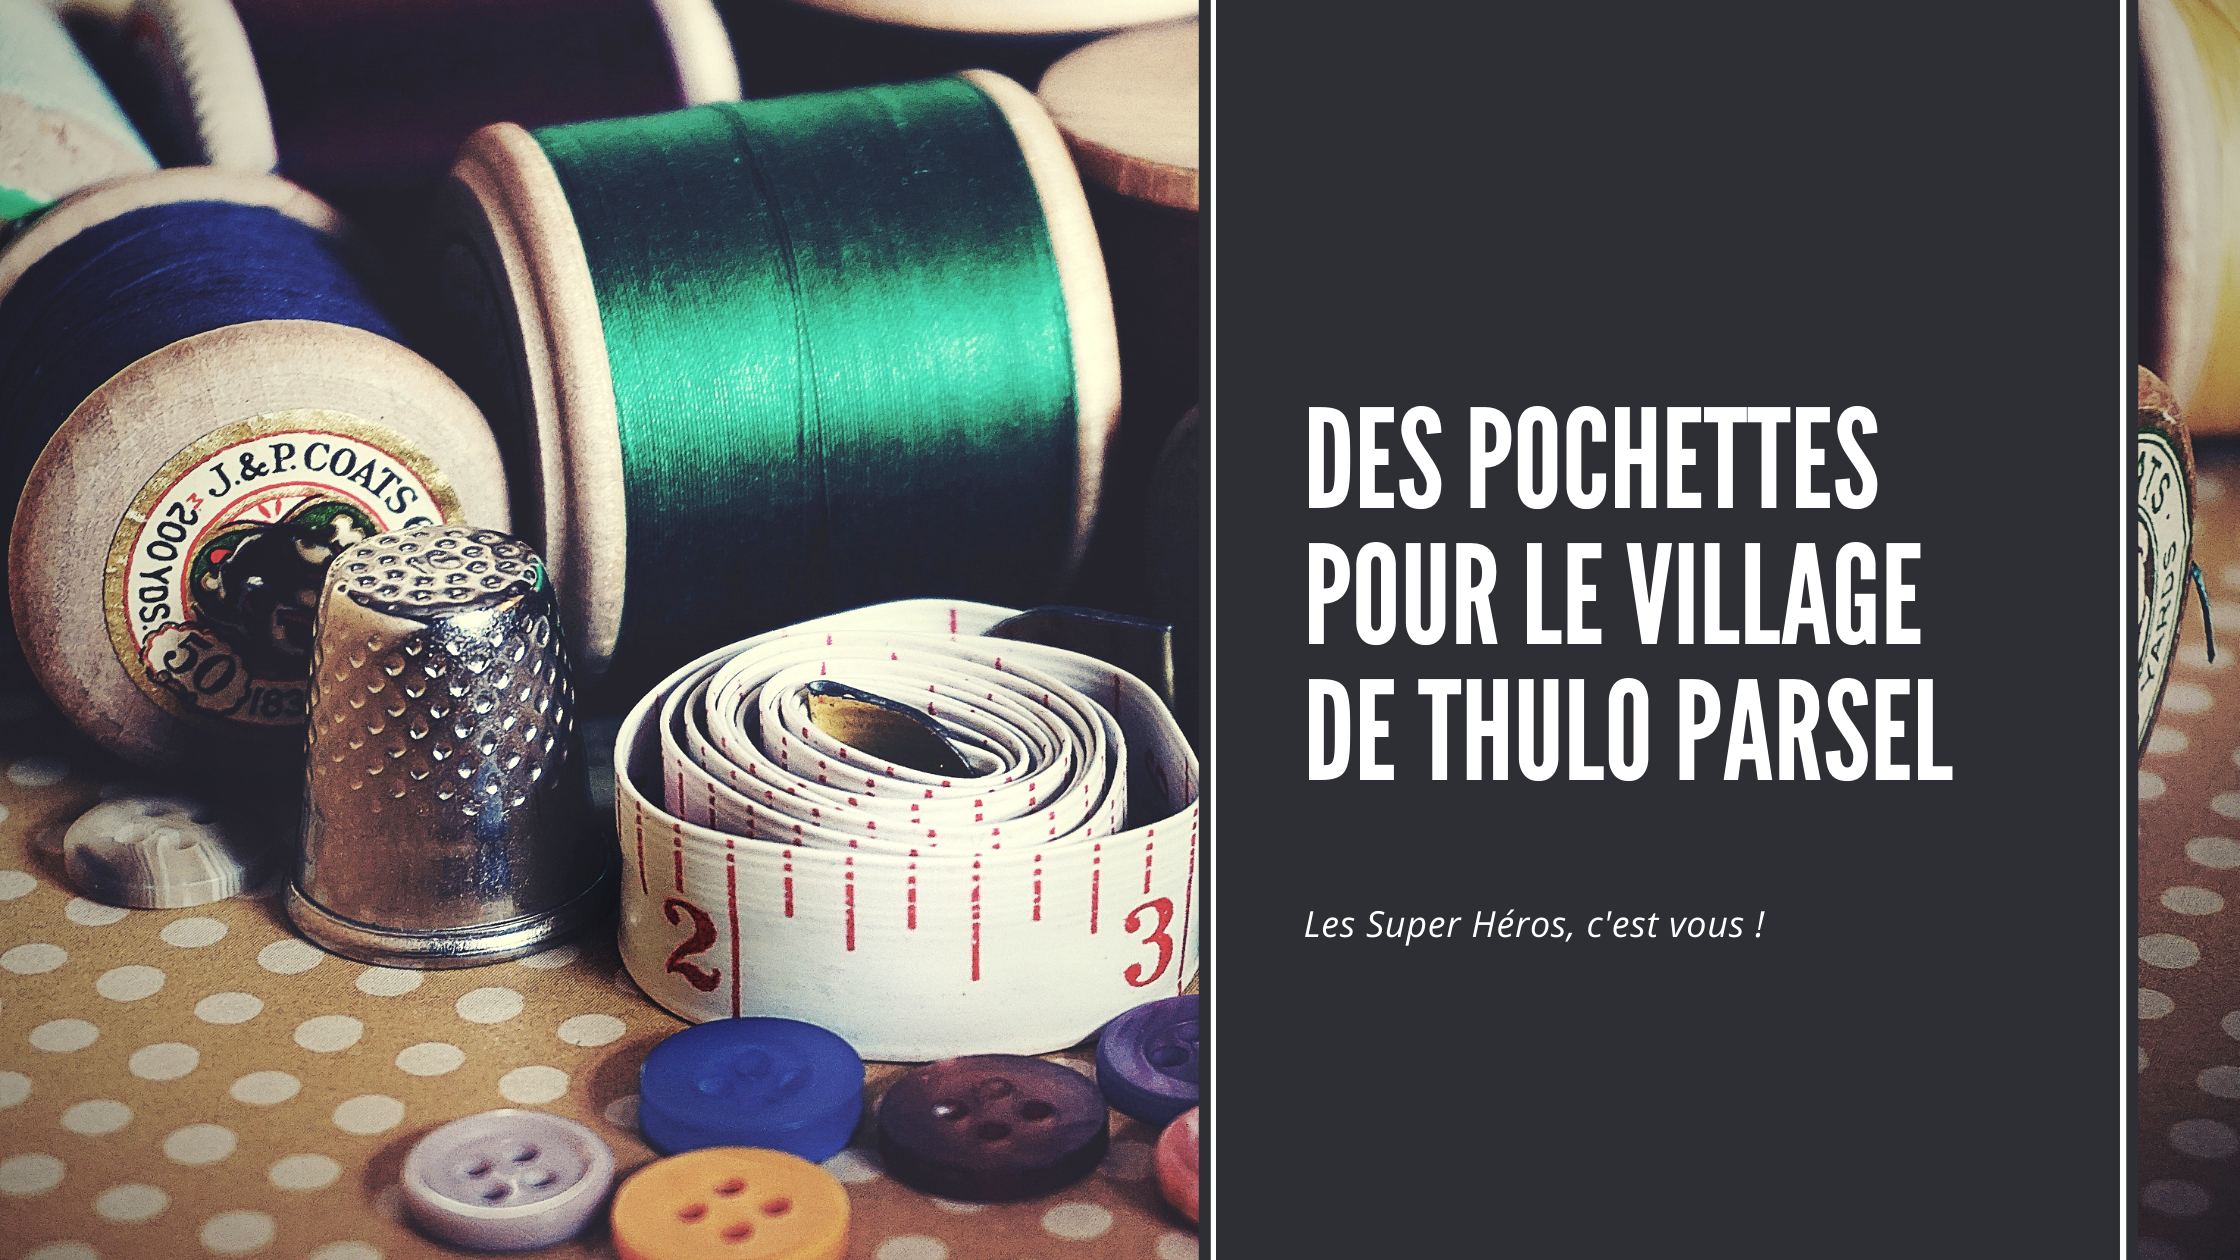 You are currently viewing DES POCHETTES POUR THULO PARSEL